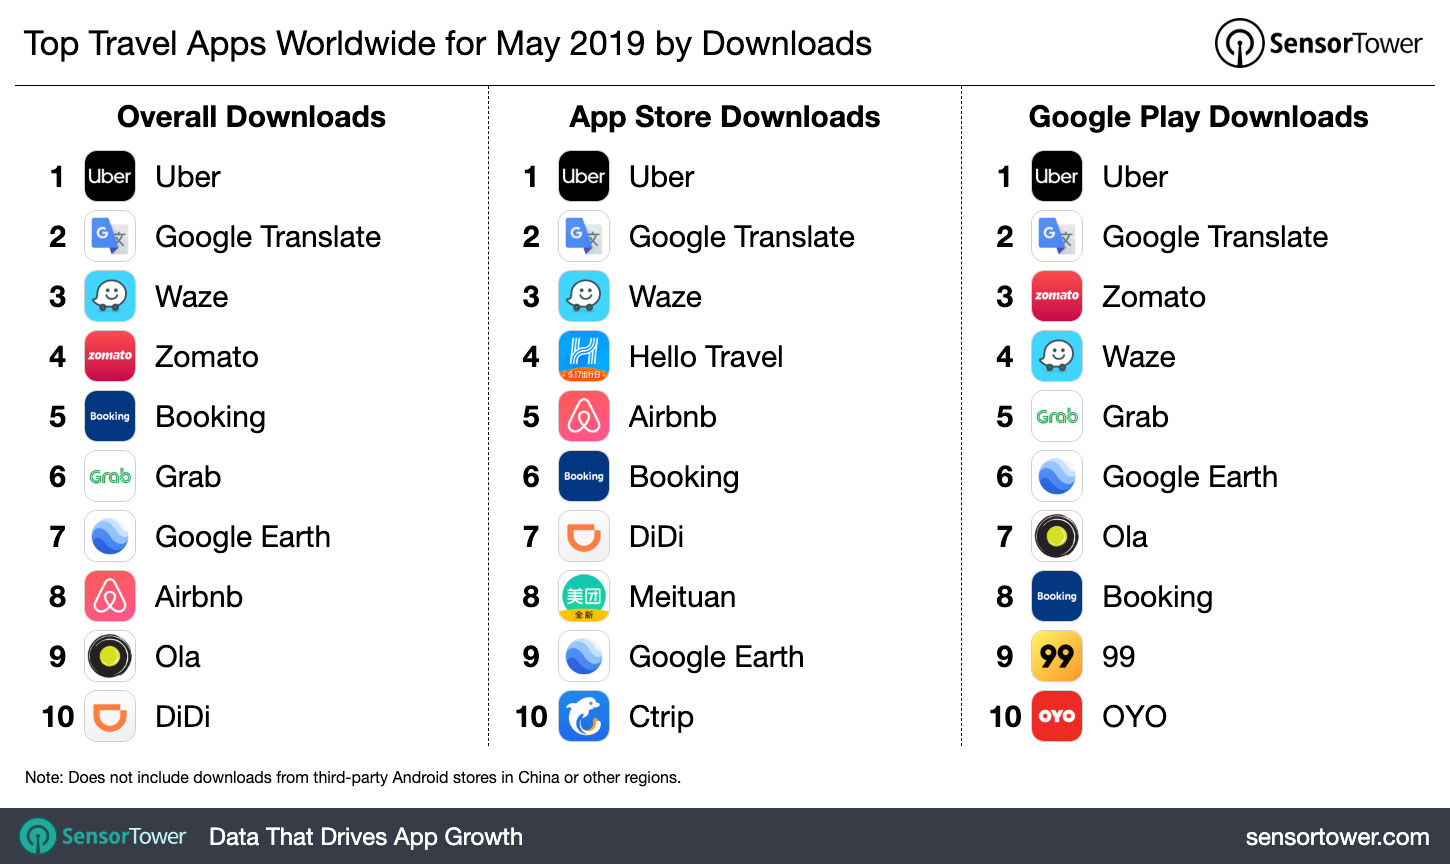 Top Travel Category Apps Worldwide for May 2019 by Downloads